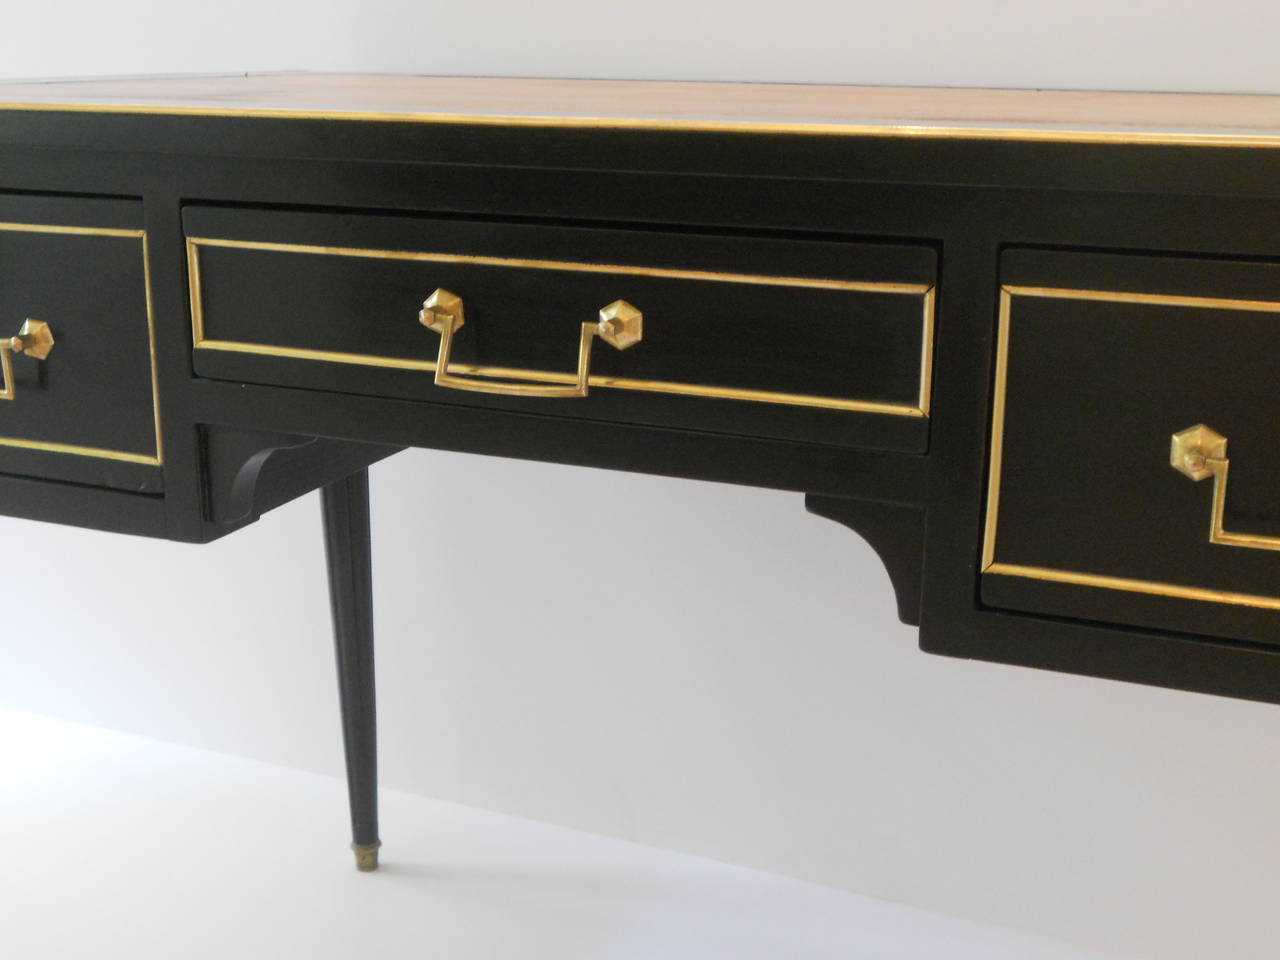 Stunning and elegant French ebonized mahogany writing desk with cognac leather writing surface and two pull-out extensions. The desk has three operable drawers and three false drawers on the opposite side so that it appears finished from all sides.